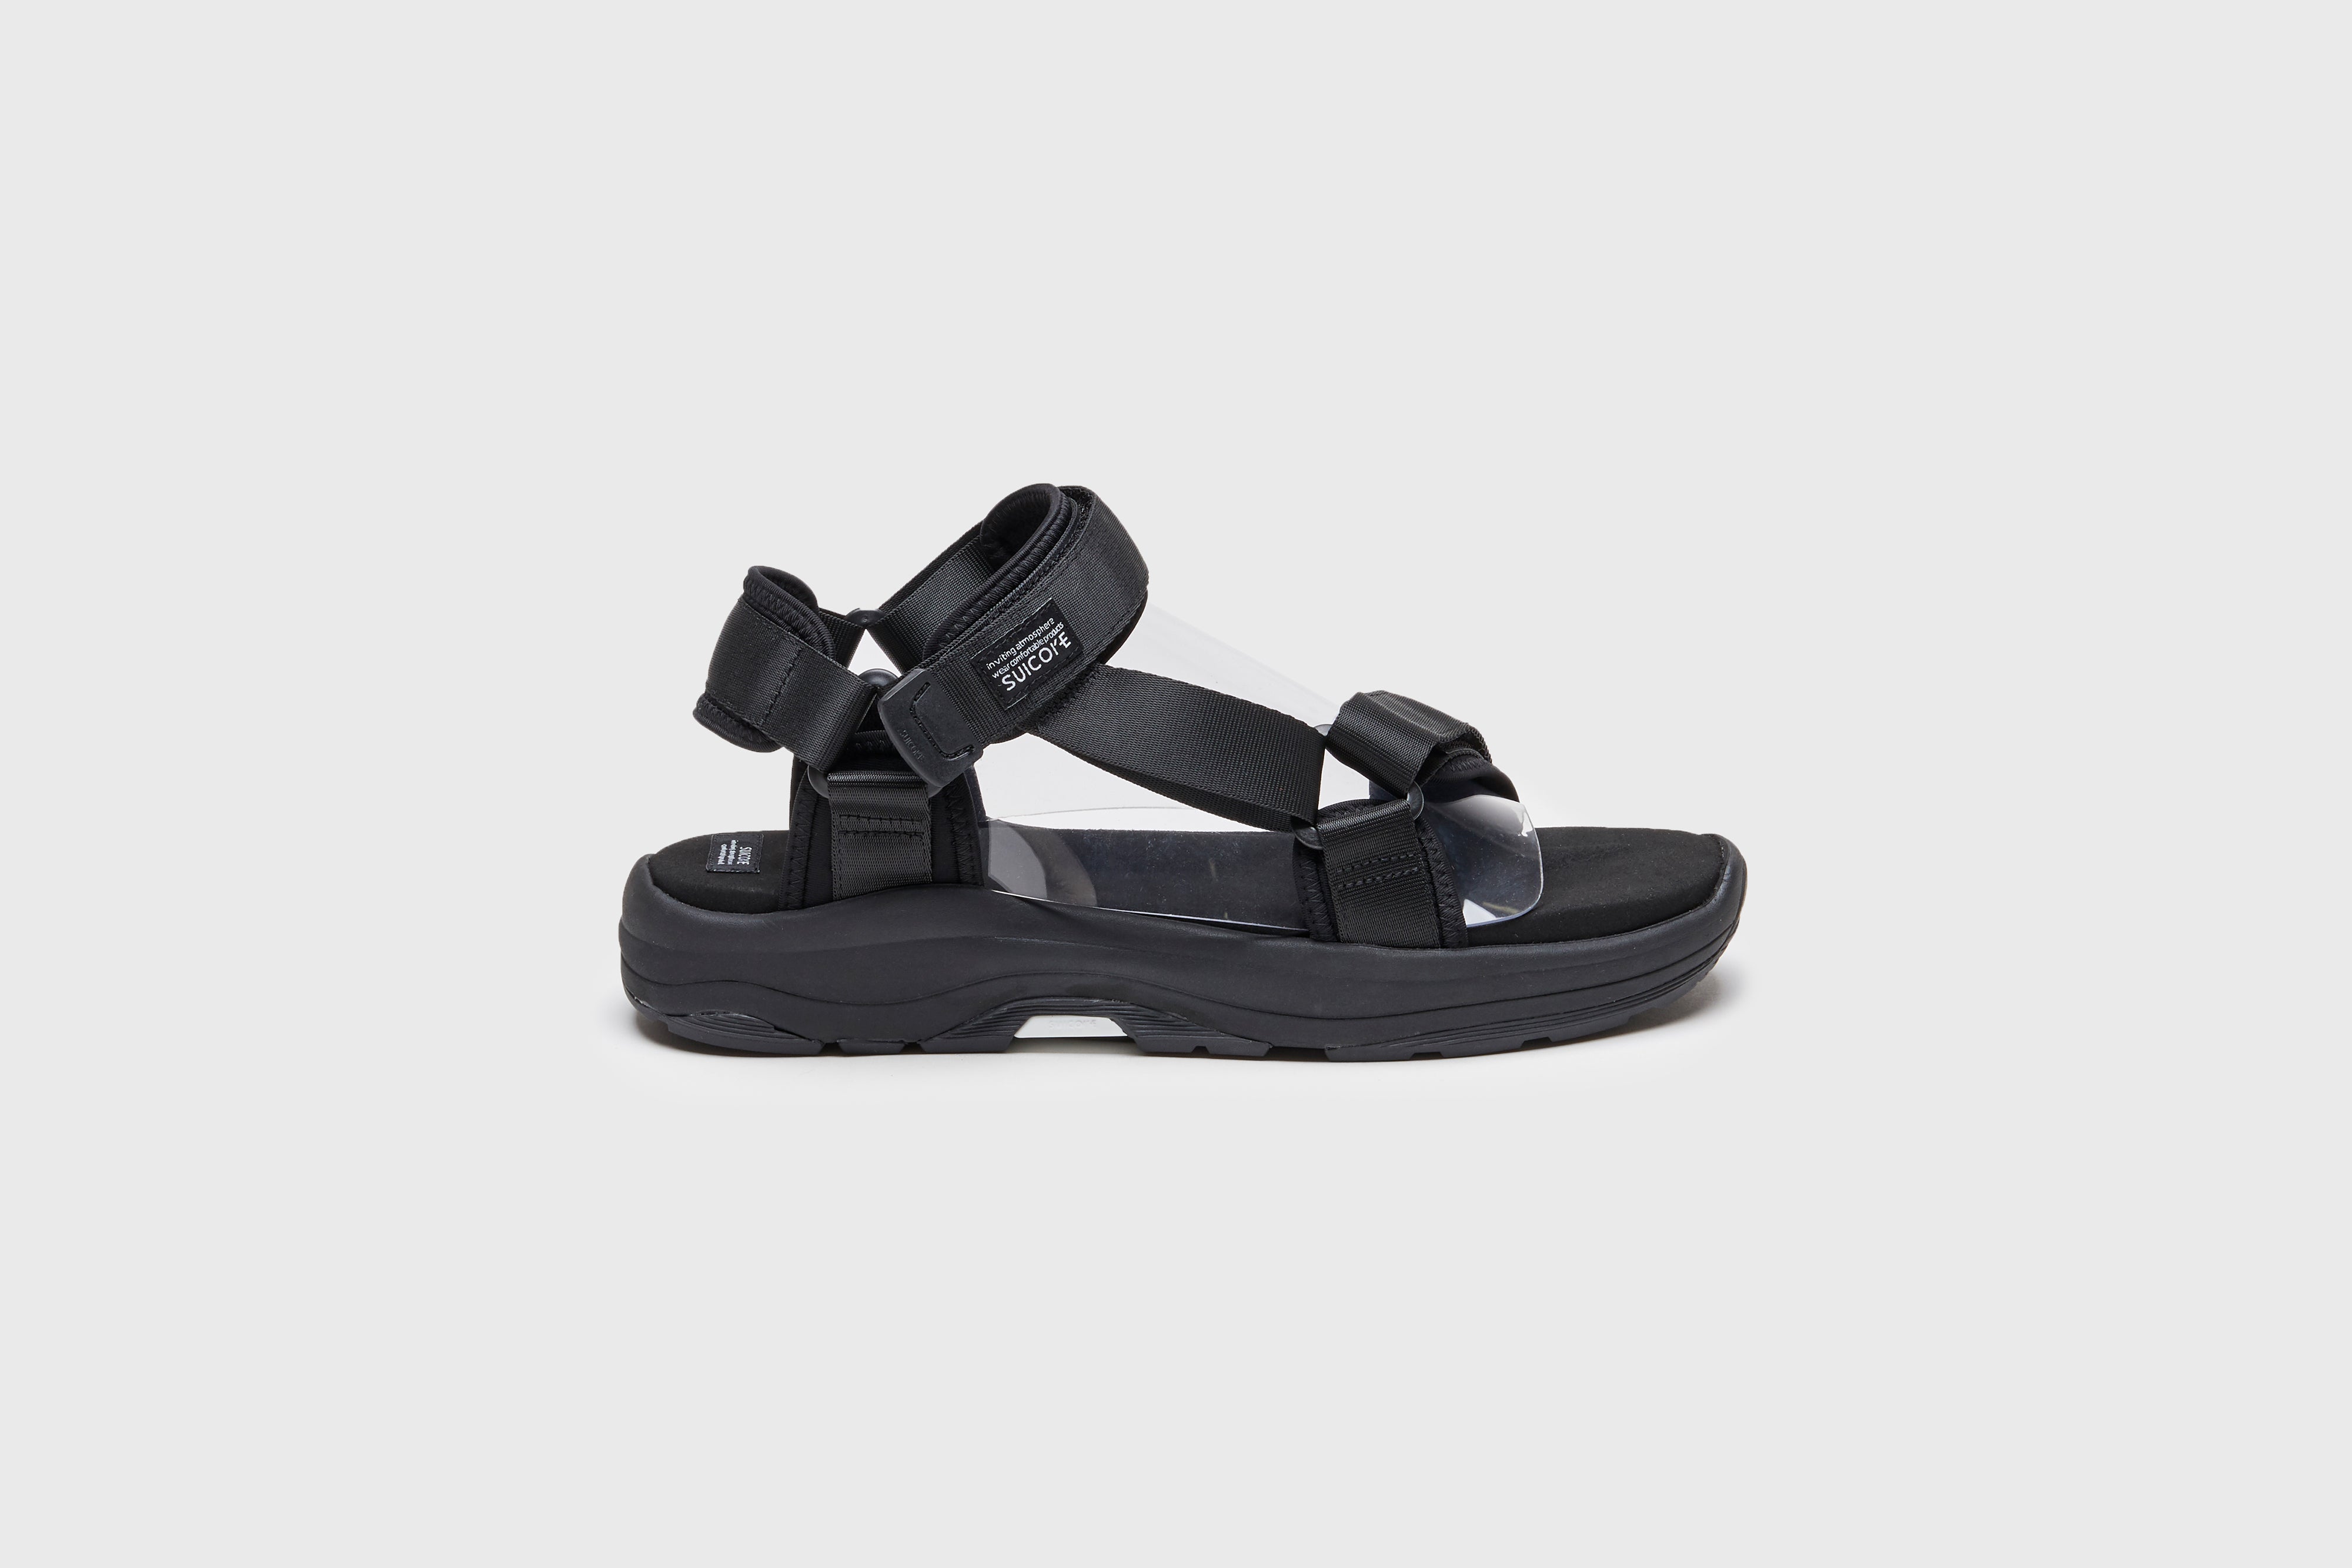 SUICOKE DEPA-Run slides with black nylon upper, black midsole and sole, strap and logo patch. From Spring/Summer 2023 collection on eightywingold Web Store, an official partner of SUICOKE. OG-333 BLACK